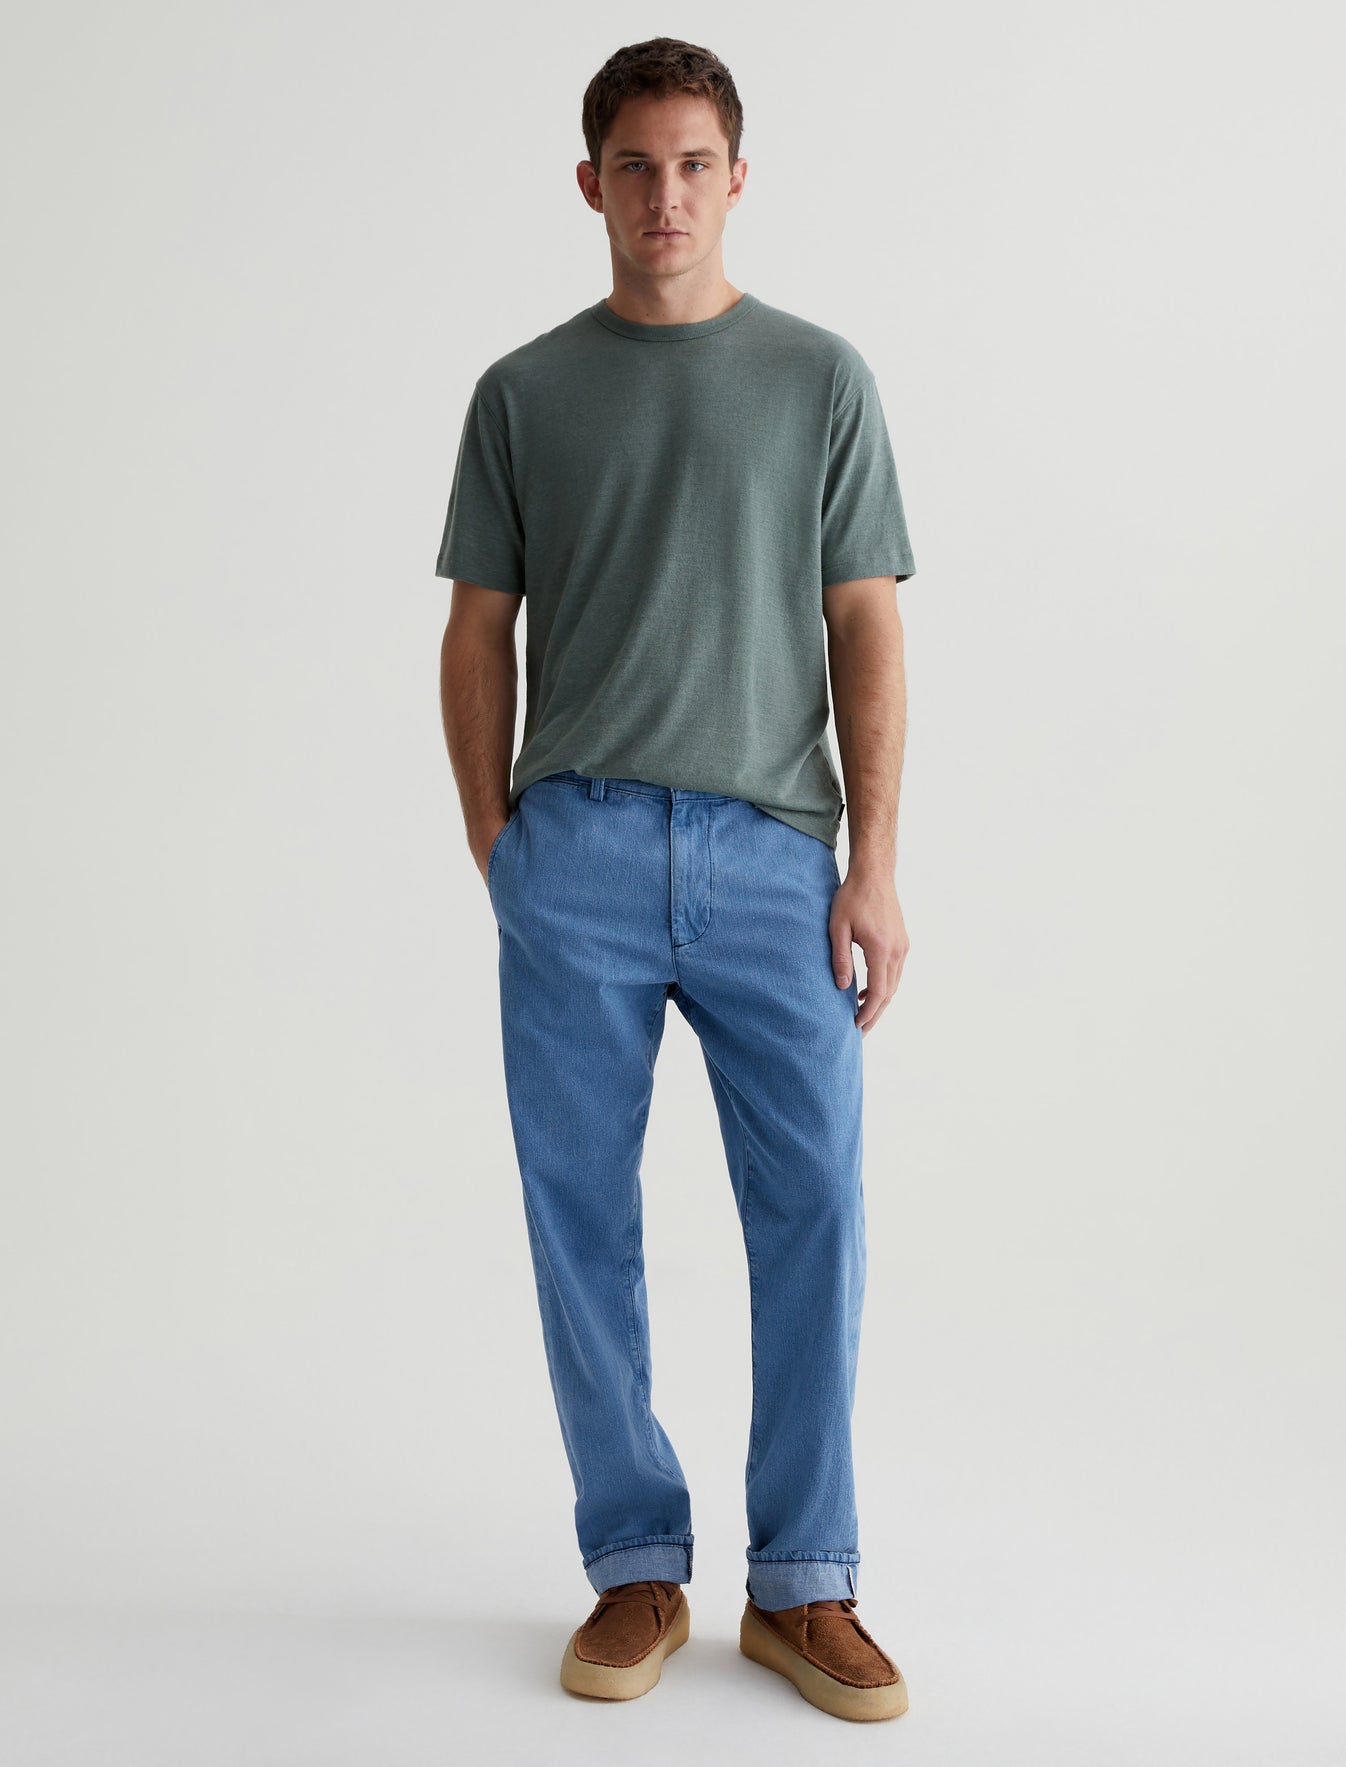 Wesley Crew Thorn Field Relaxed T-Shirt Men Top Photo 2